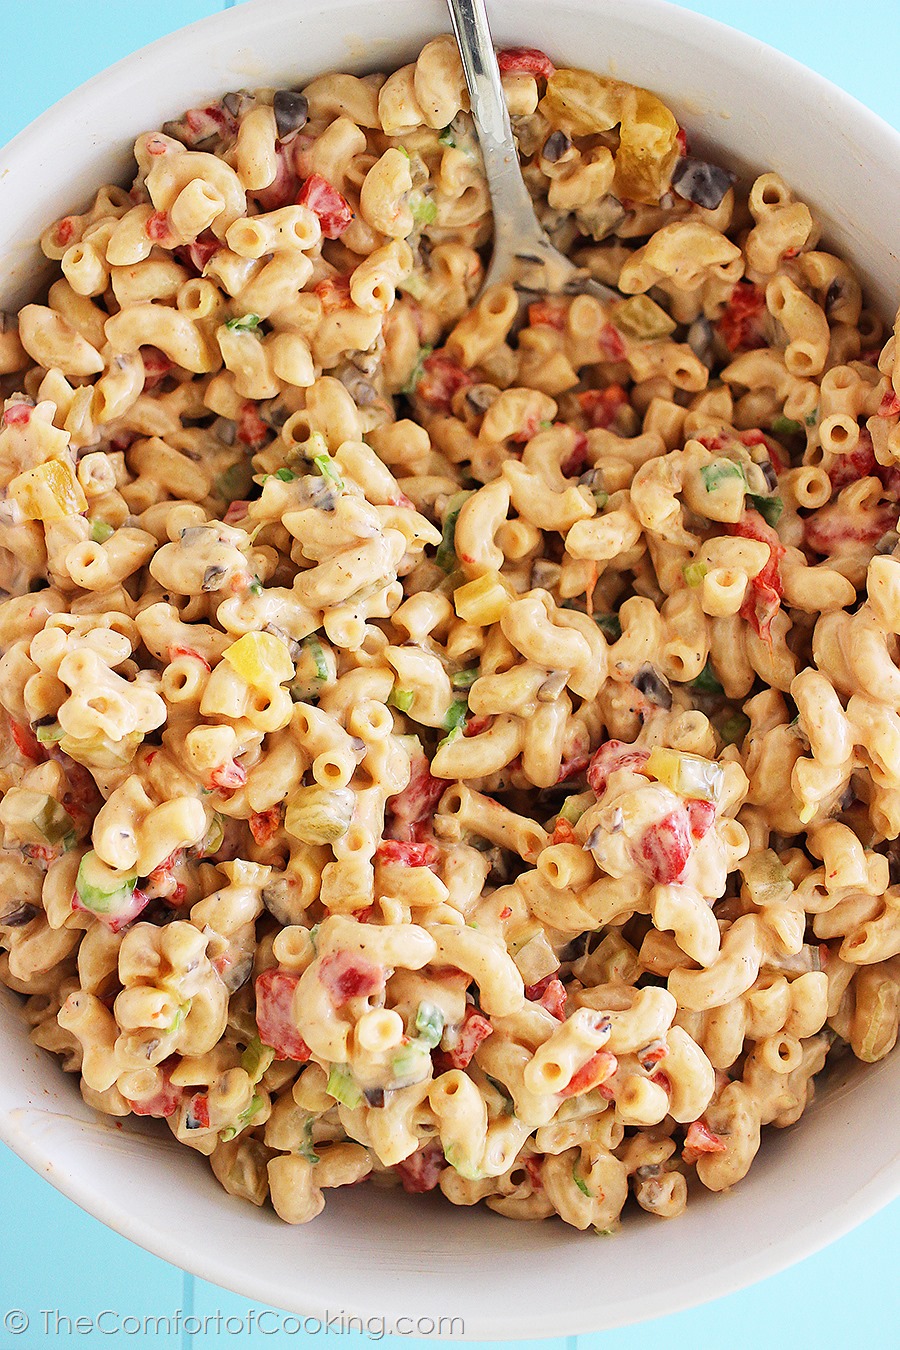 Best-Ever Creamy Macaroni Salad – For backyard BBQs or any occasion, bring the best-ever macaroni salad... creamy, tangy and full of veggies! | thecomfortofcooking.com